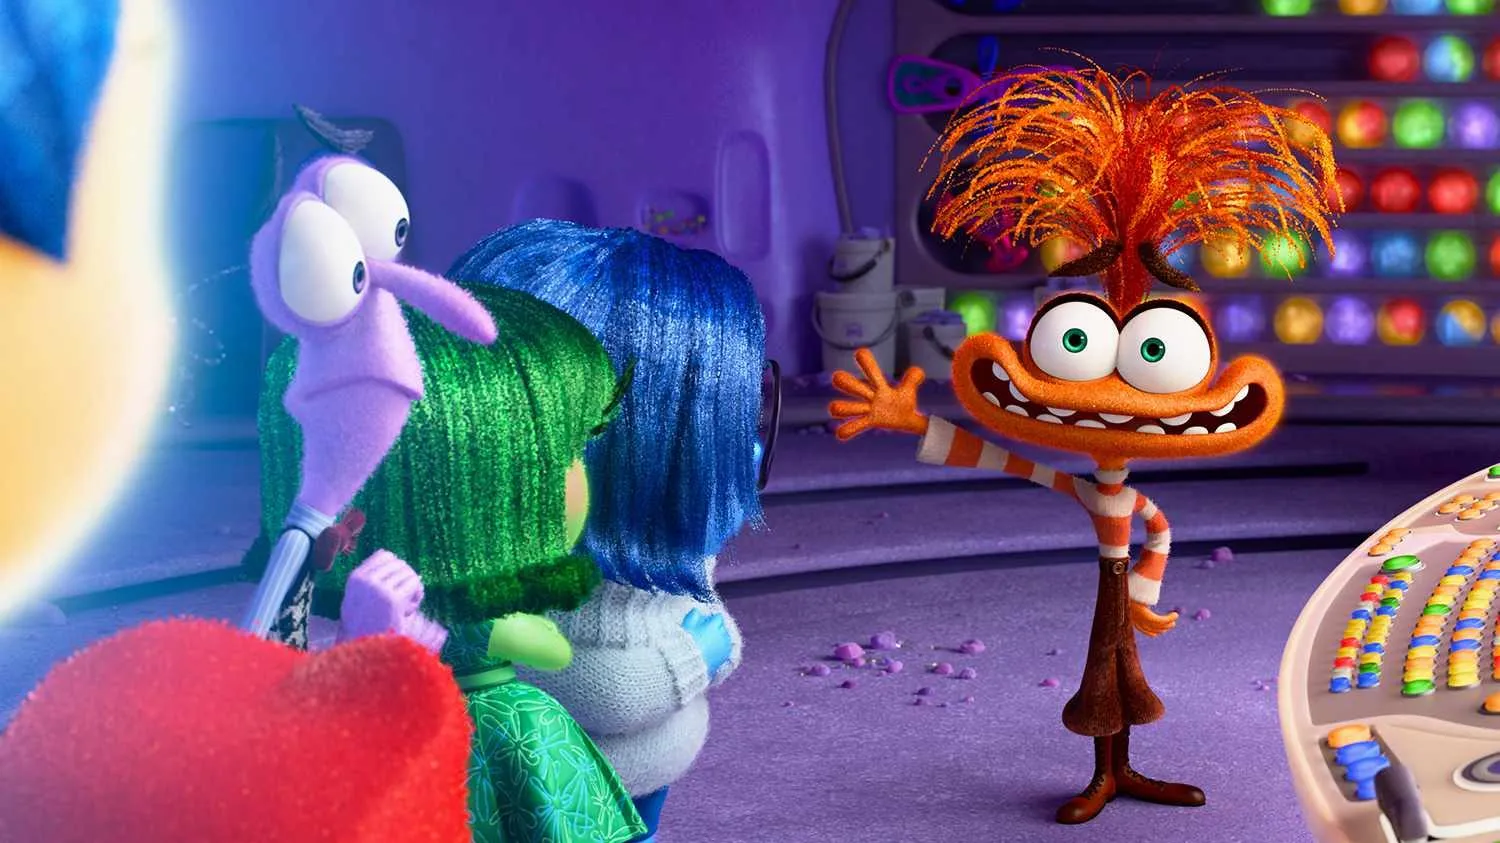 Inside Out 2: Disney Introduces New Emotions to Riley's World